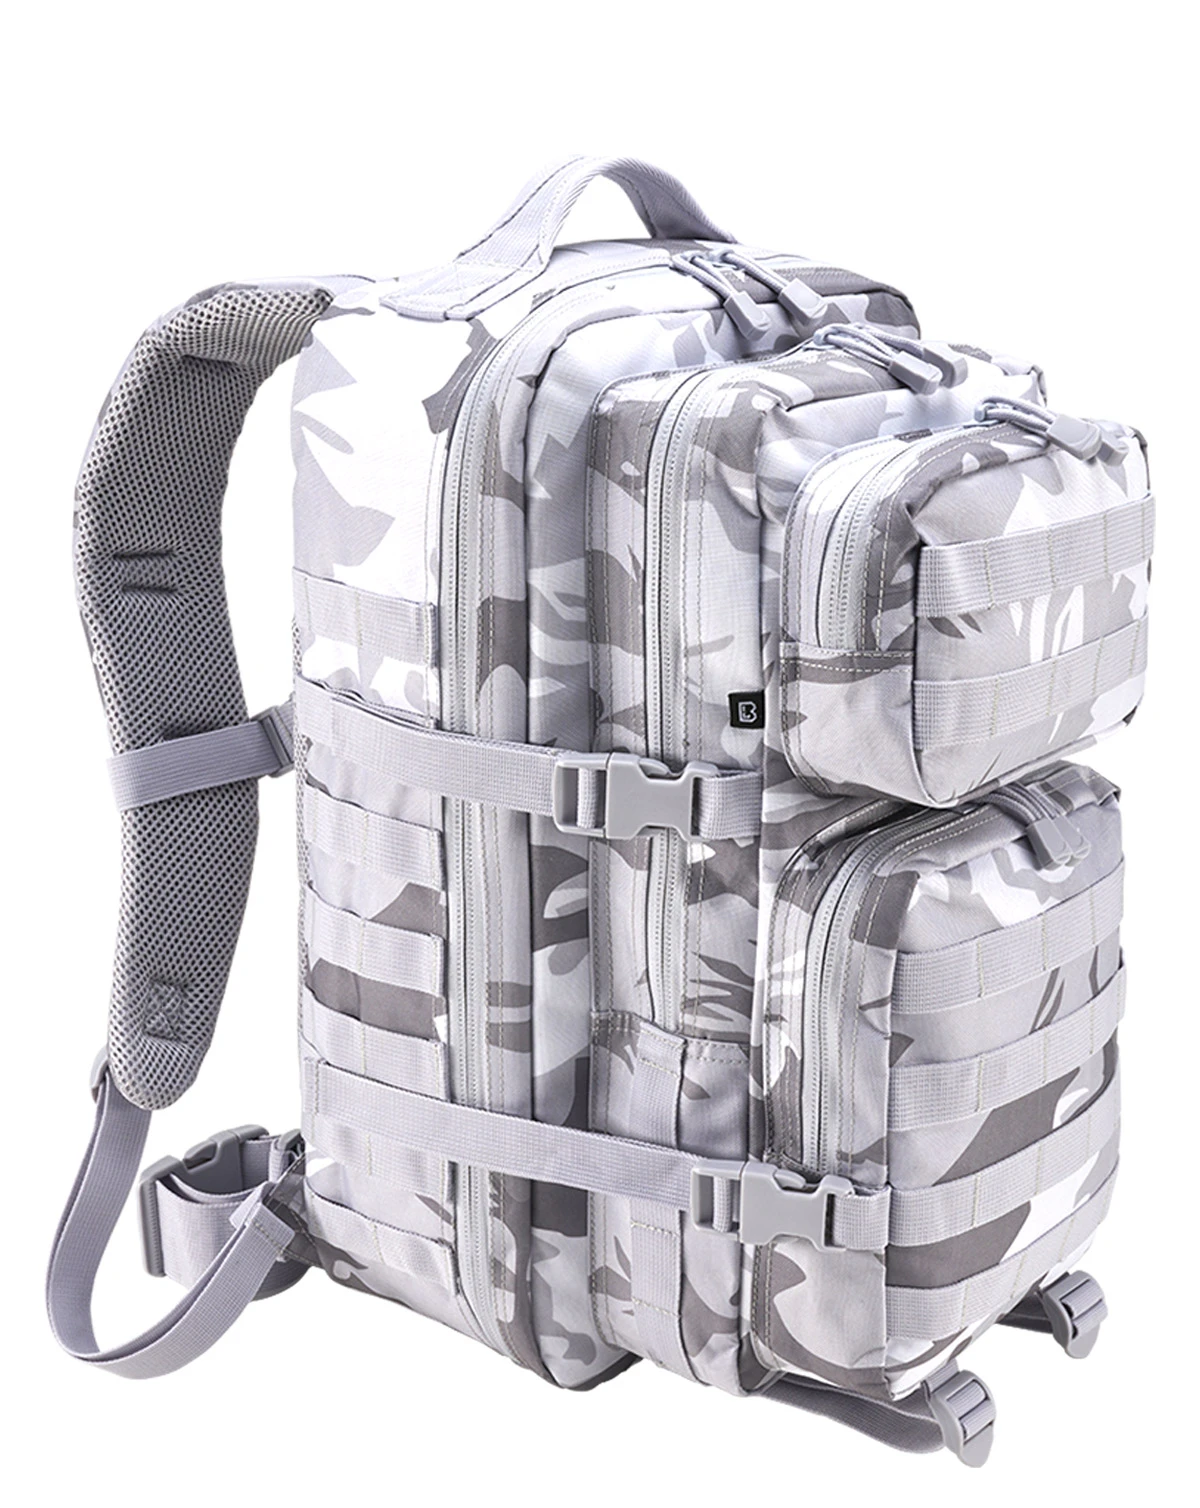 MOLLE Backpacks, MOLLE Packs, MOLLE